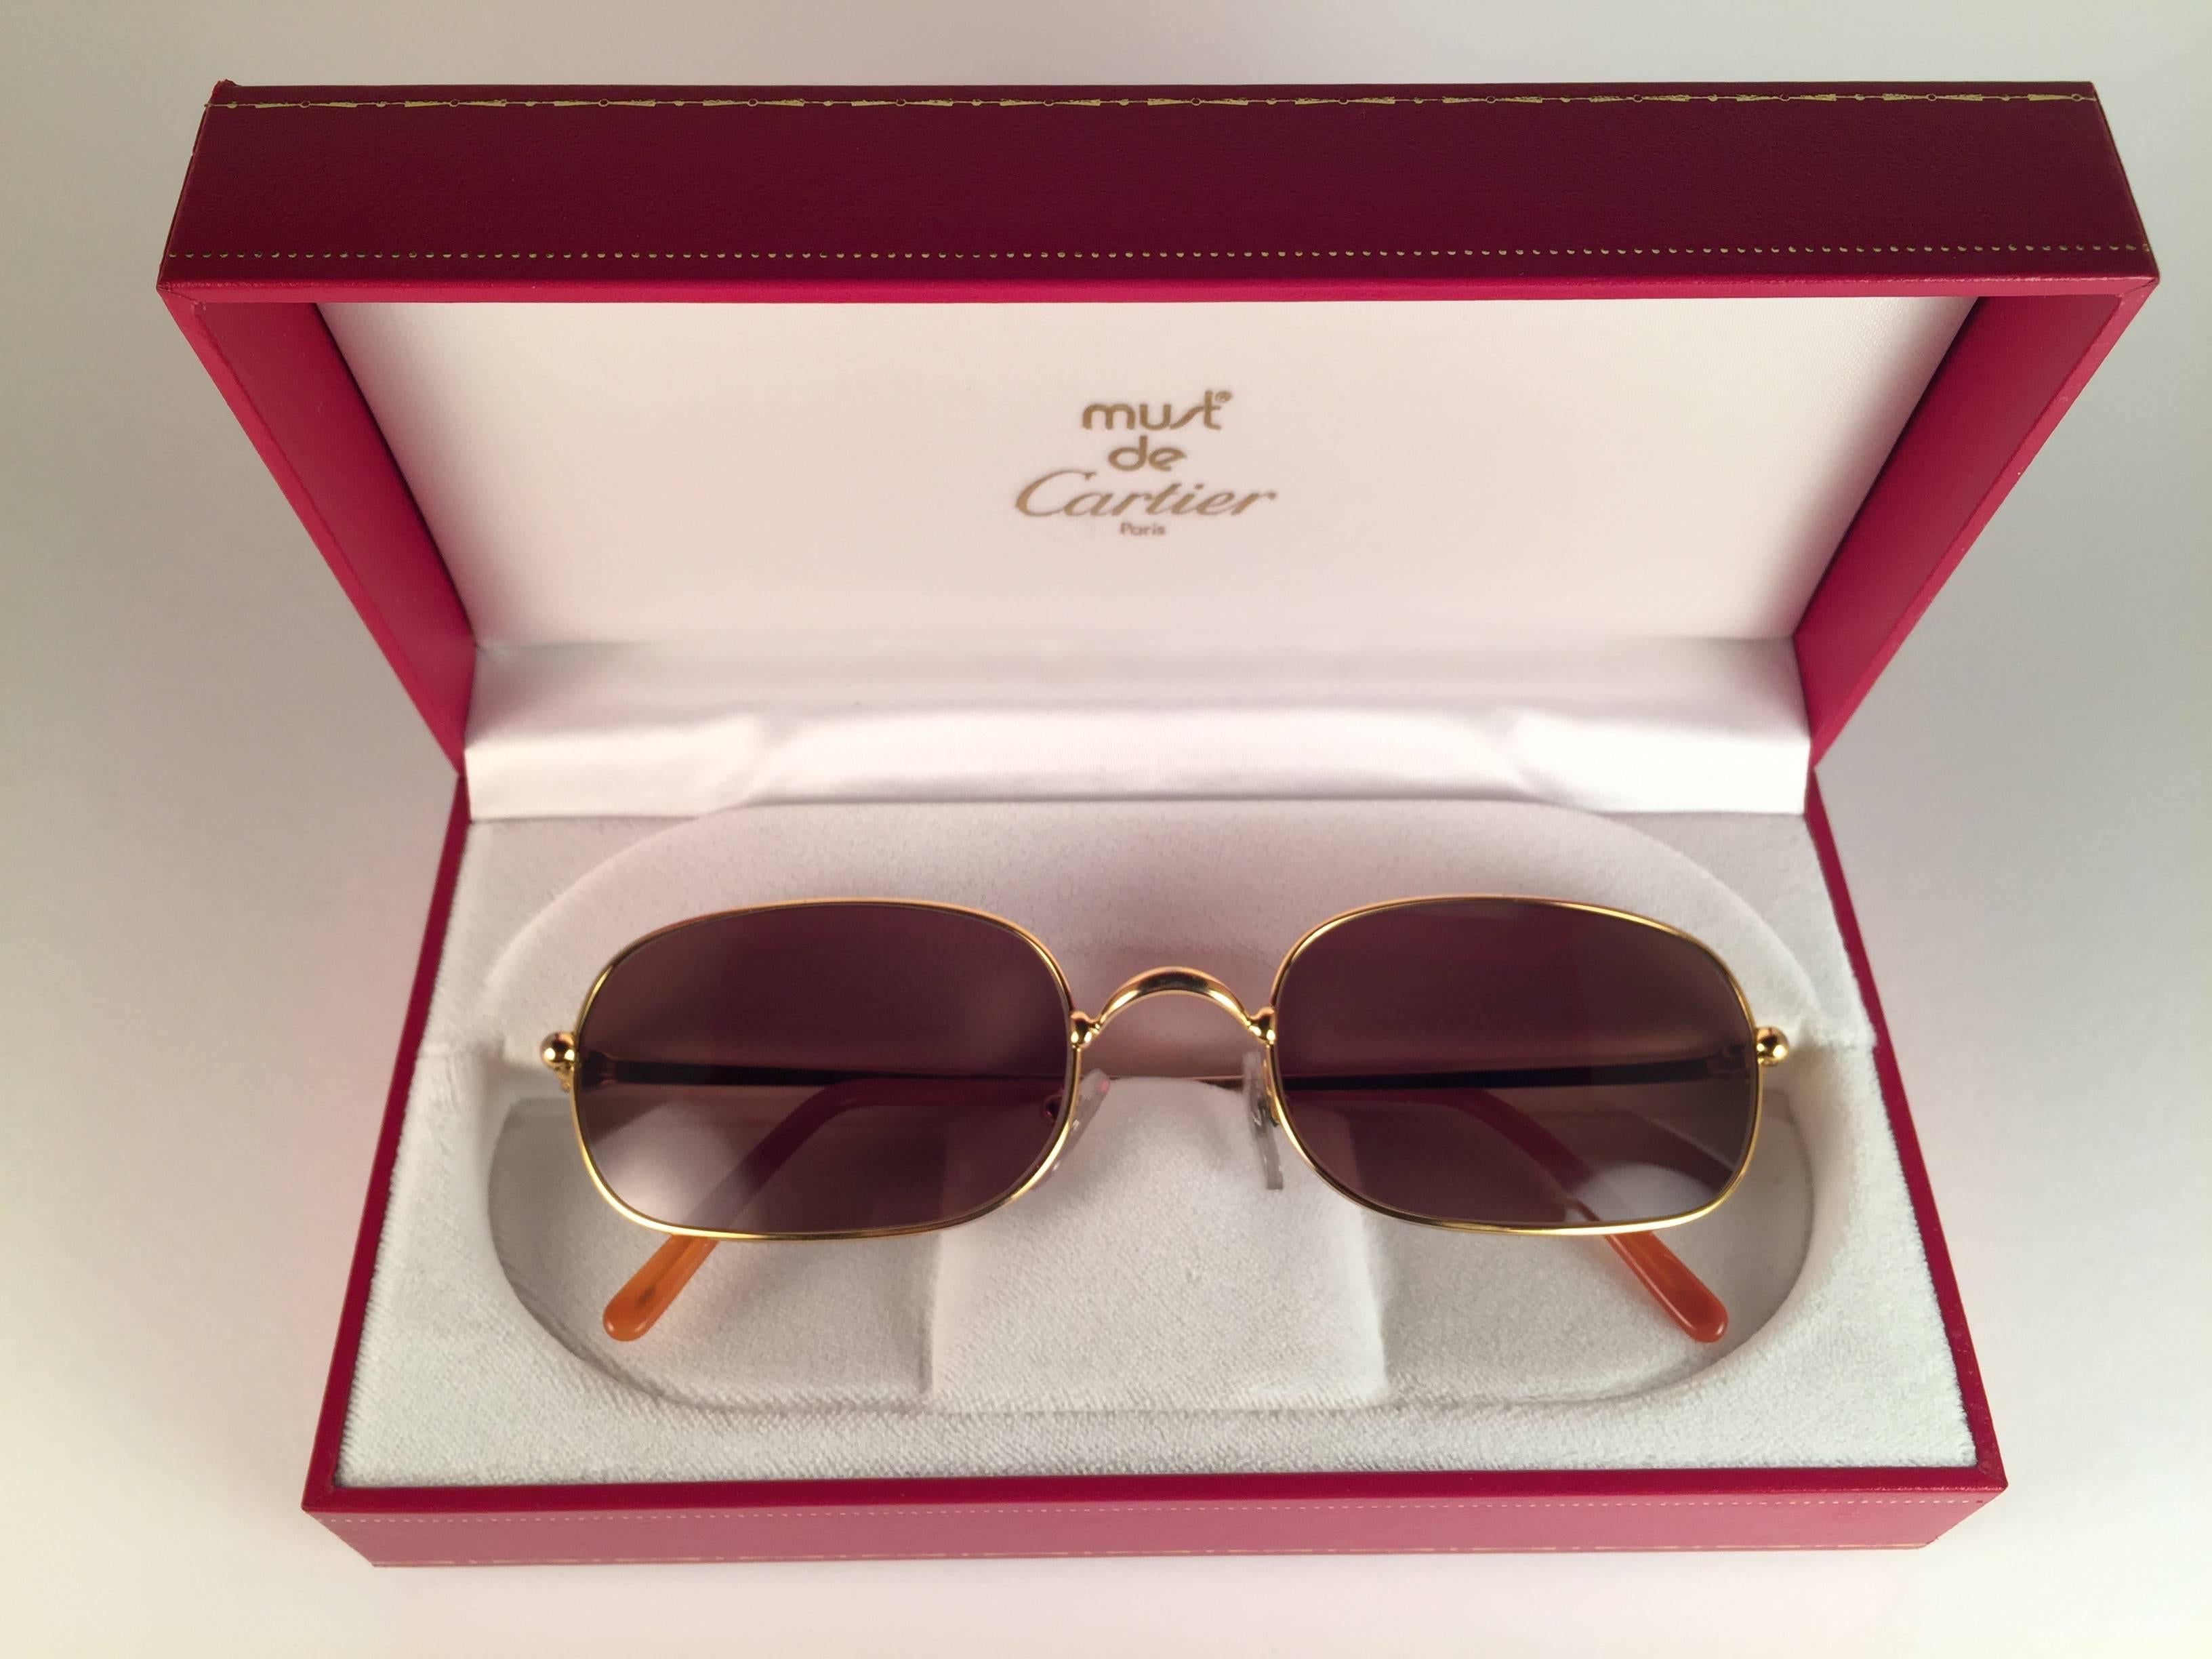 New 1990 Cartier Deimios 54 [] 21 Sunglasses with brown (uv protection) lenses.  All hallmarks. Cartier gold signs on the ear paddles. These are like a pair of jewels on your nose. Beautiful design and a real sign of the times. Original Cartier hard